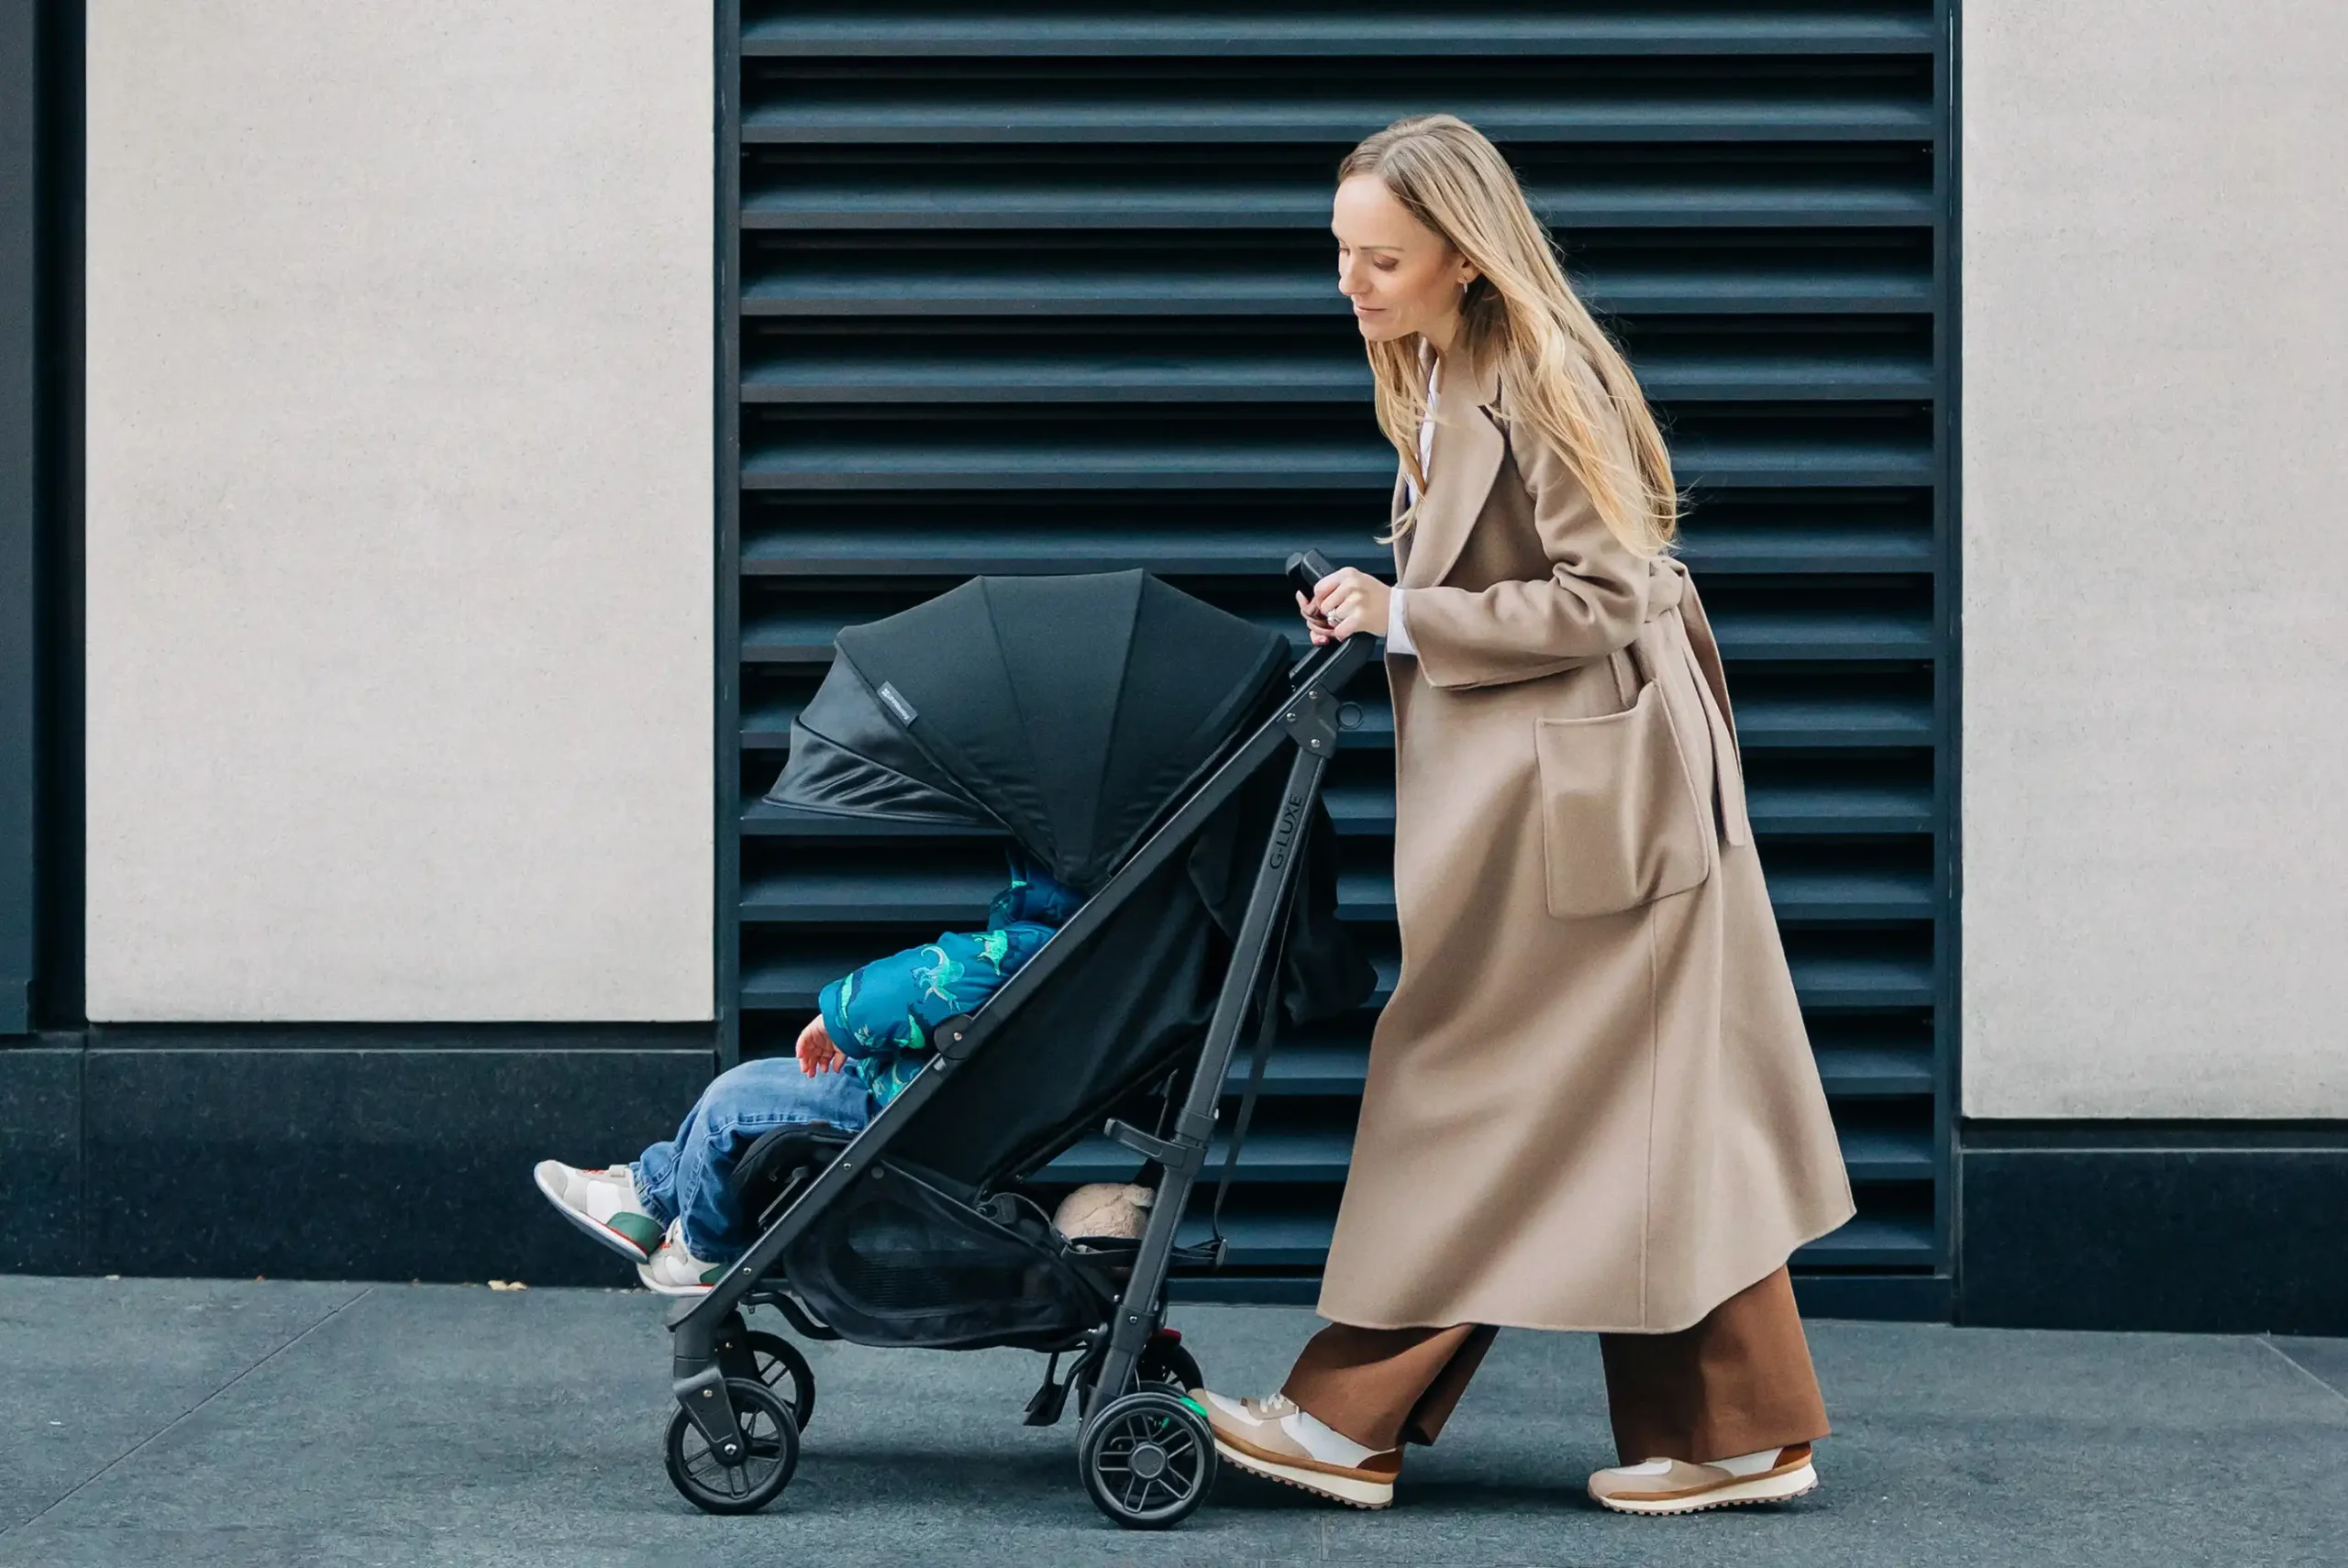 A mom pushes her child comfortably relaxing in the G-Luxe Stroller thanks to its reclining seat and extra large canopy for sunny days